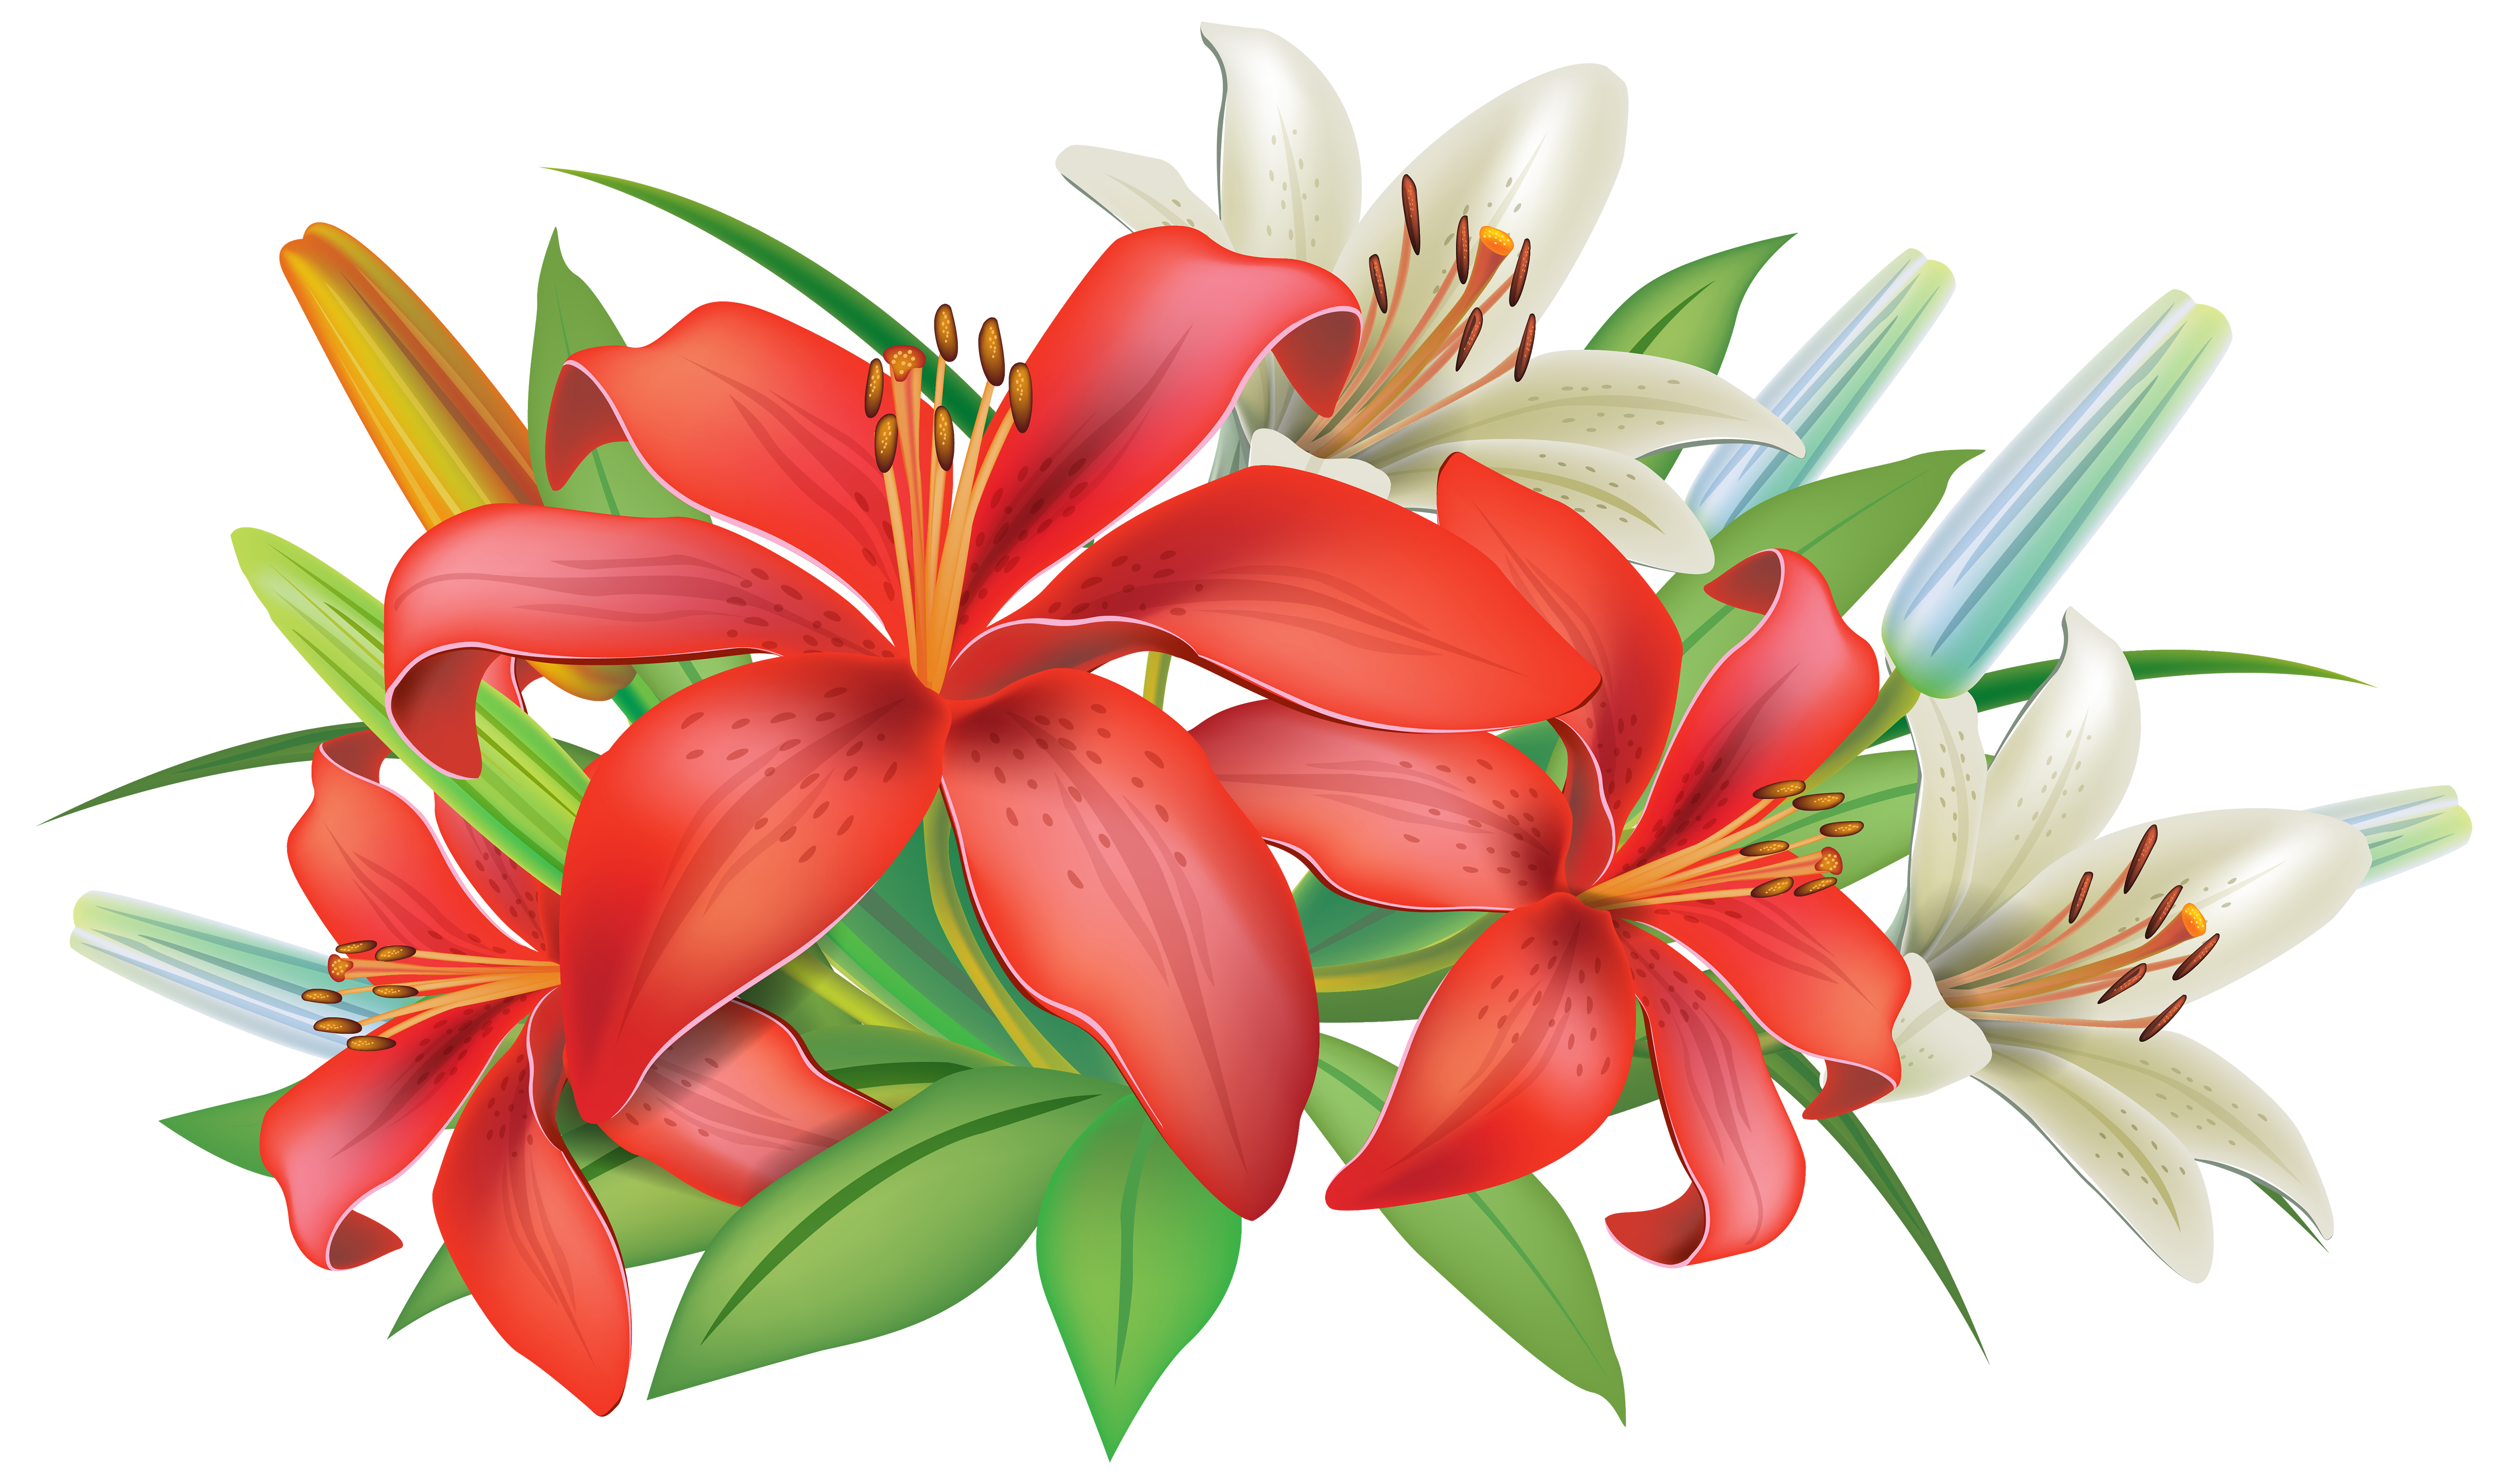 clipart borders easter lily